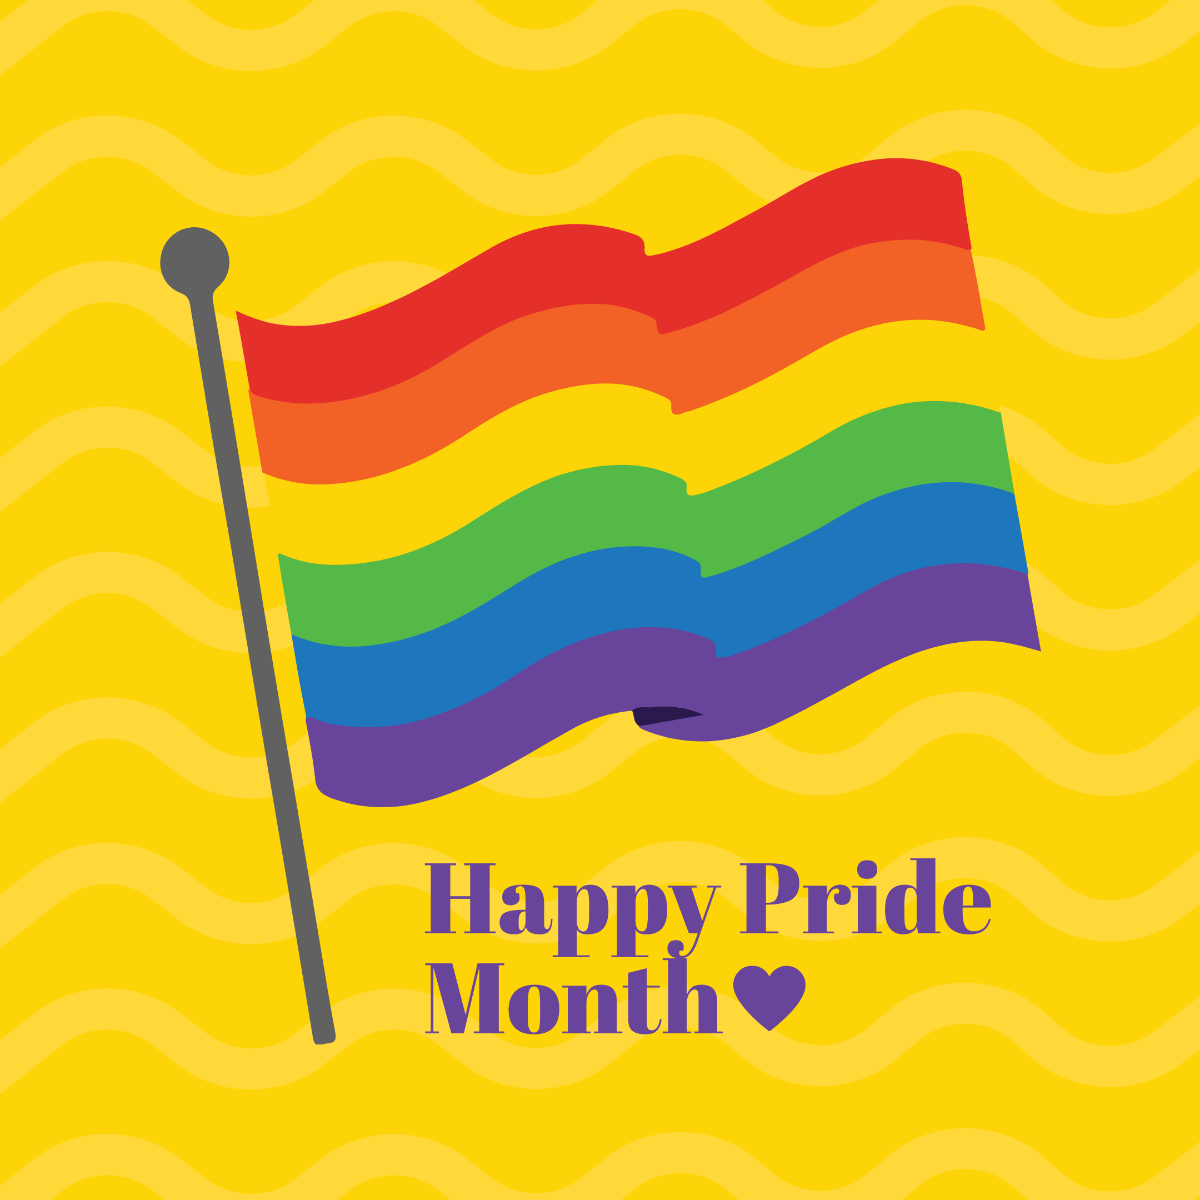 Happy Pride Month Image Template